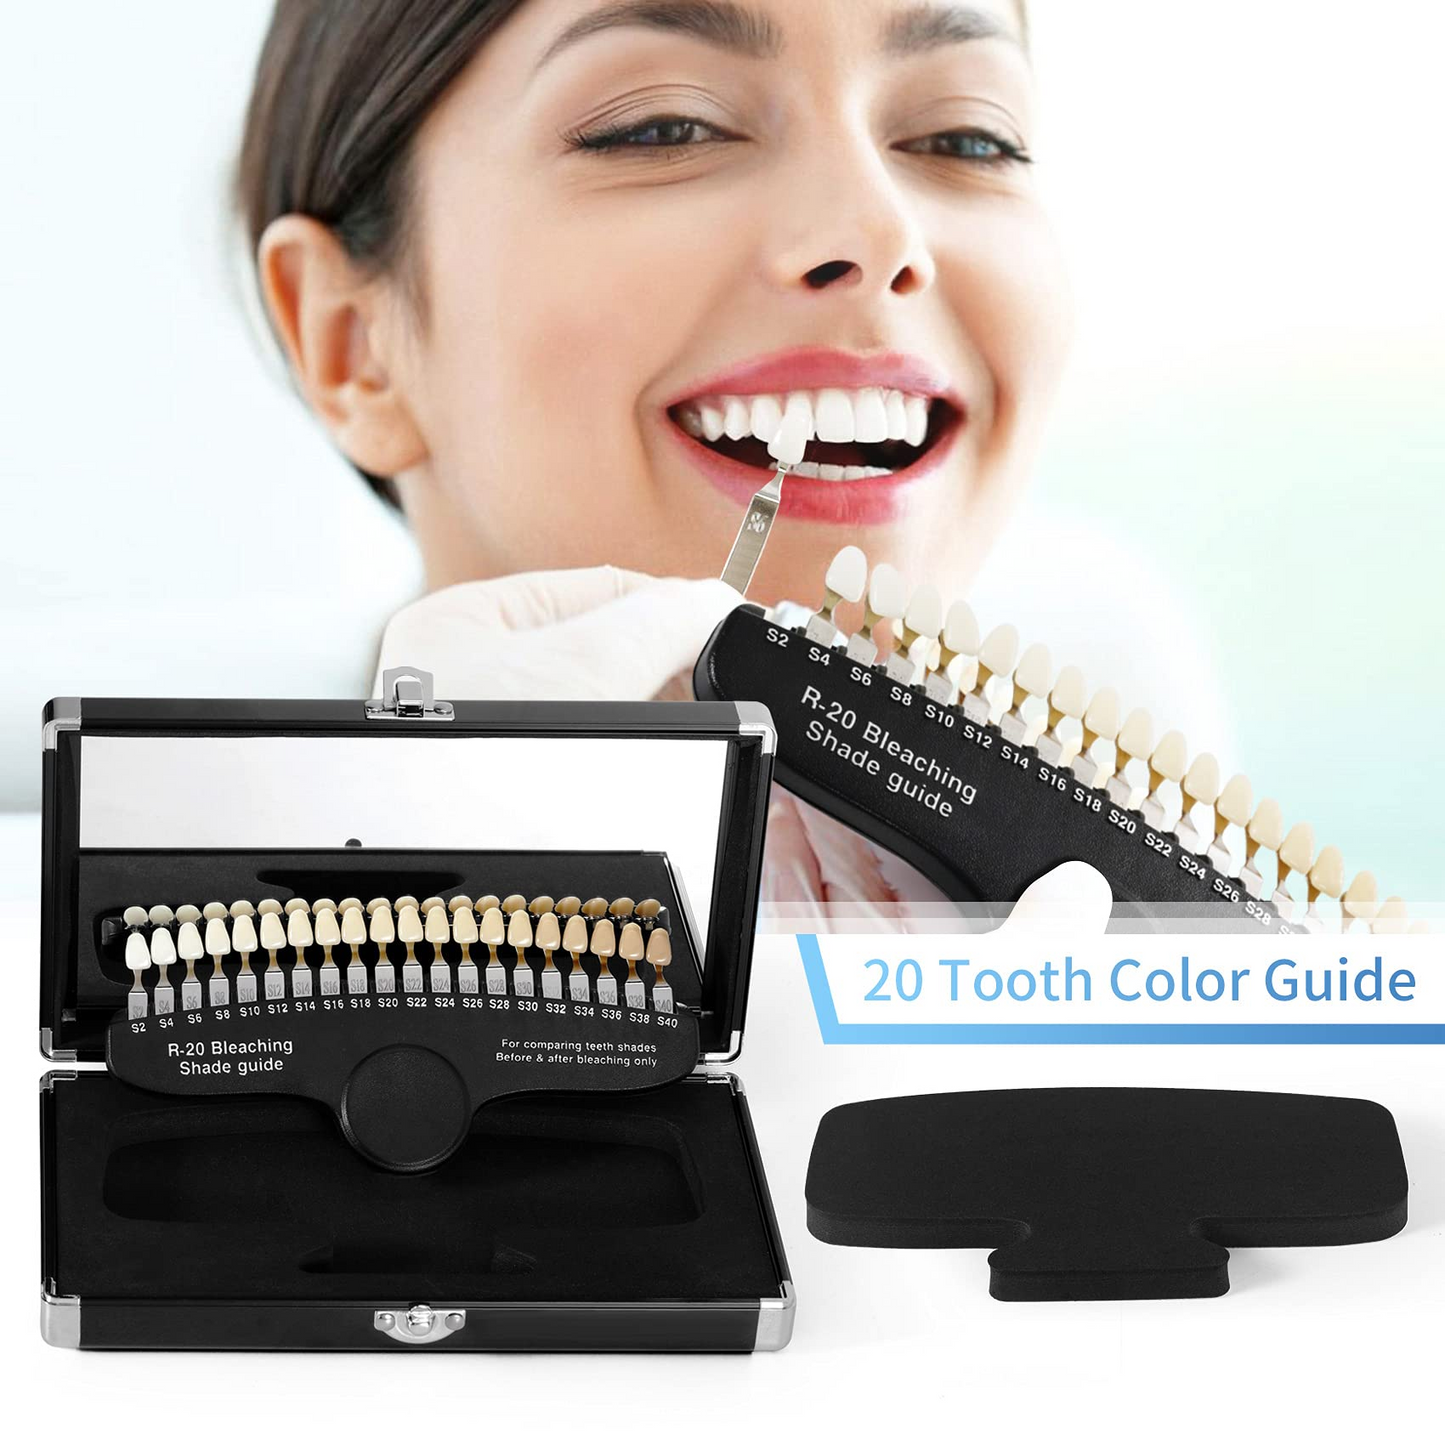 Dental Teeth Shade Guide Professional Porcelain 3D R-20 Tooth Whitening Shade Chart with 20 Colors, Dental Bleaching Shade Tab for Dentist Tracking Teeth Whitening Course